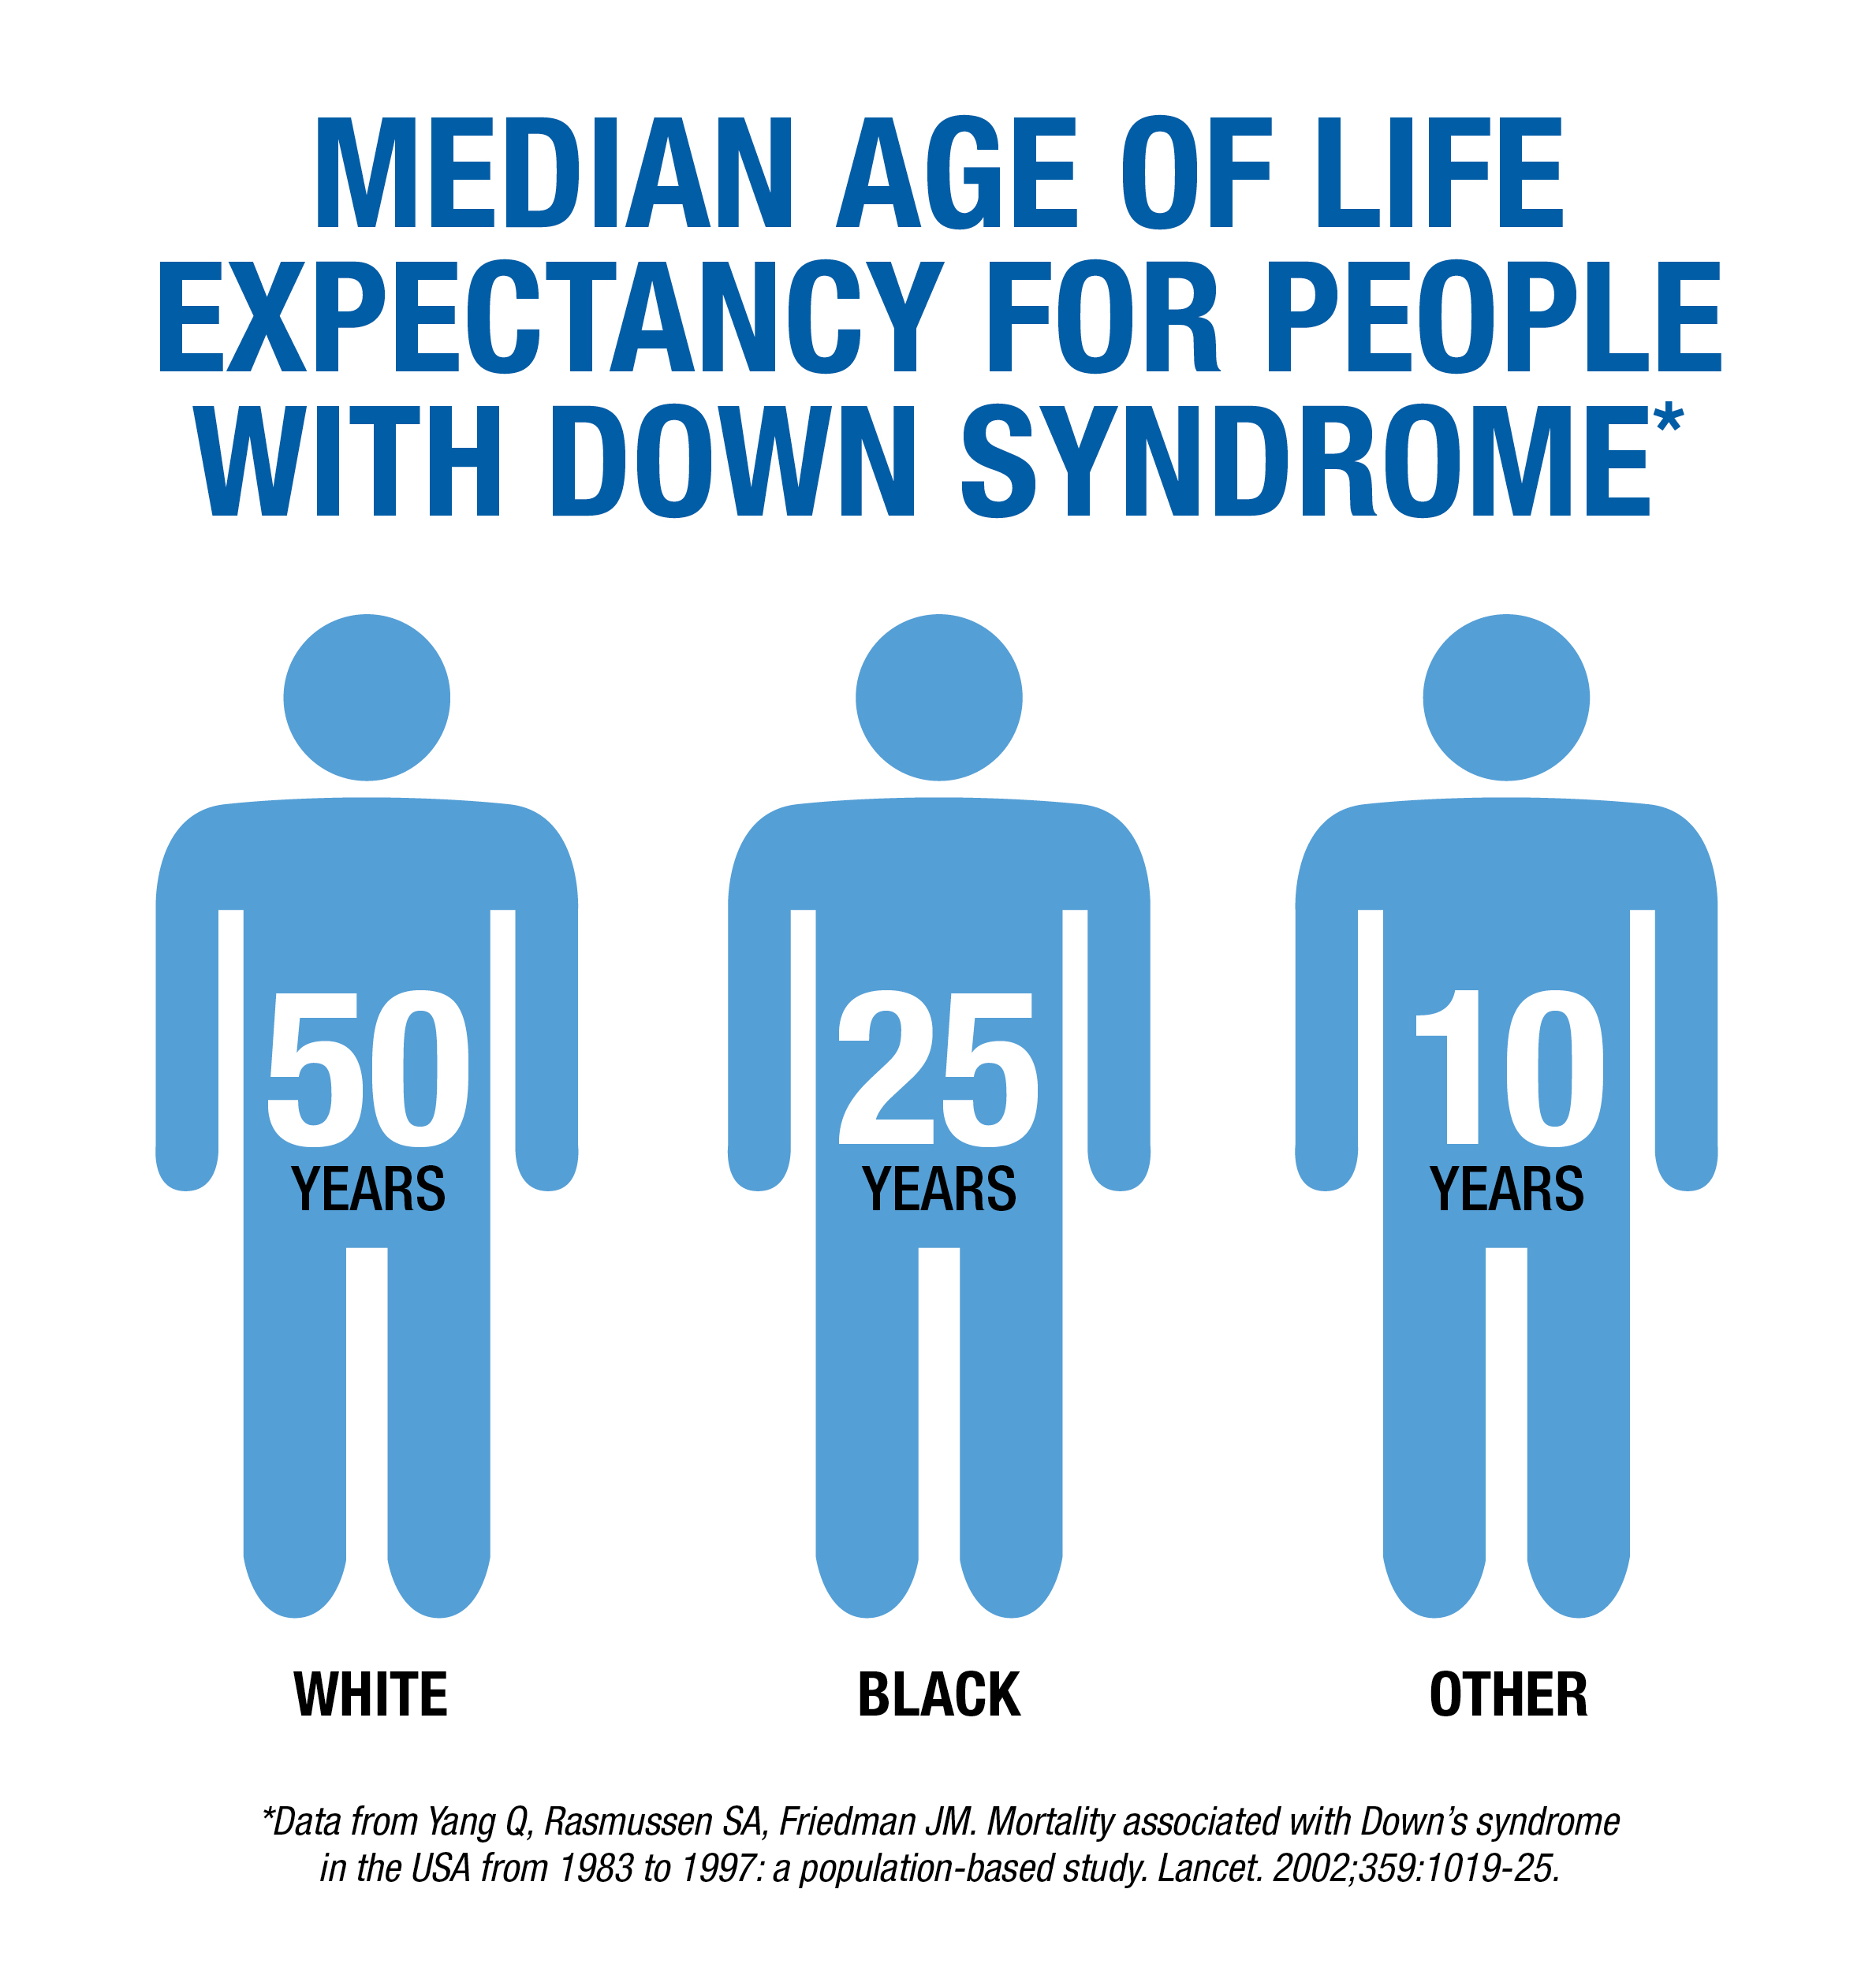 Down Syndrome Life Expectancy Chart: A Visual Reference of Charts ...